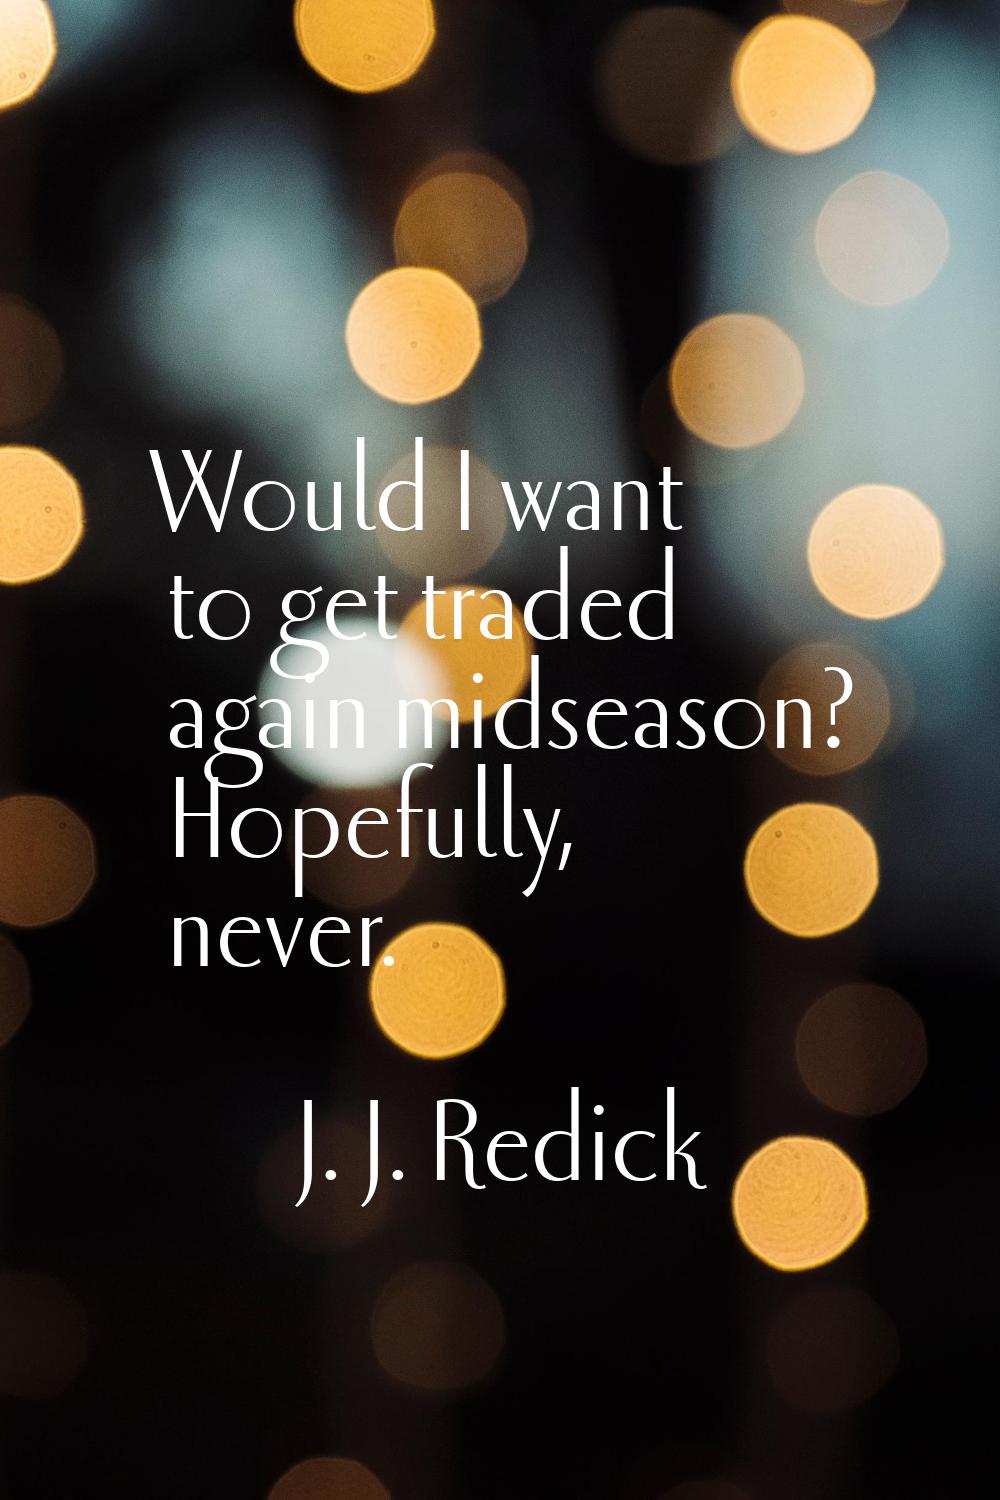 Would I want to get traded again midseason? Hopefully, never.